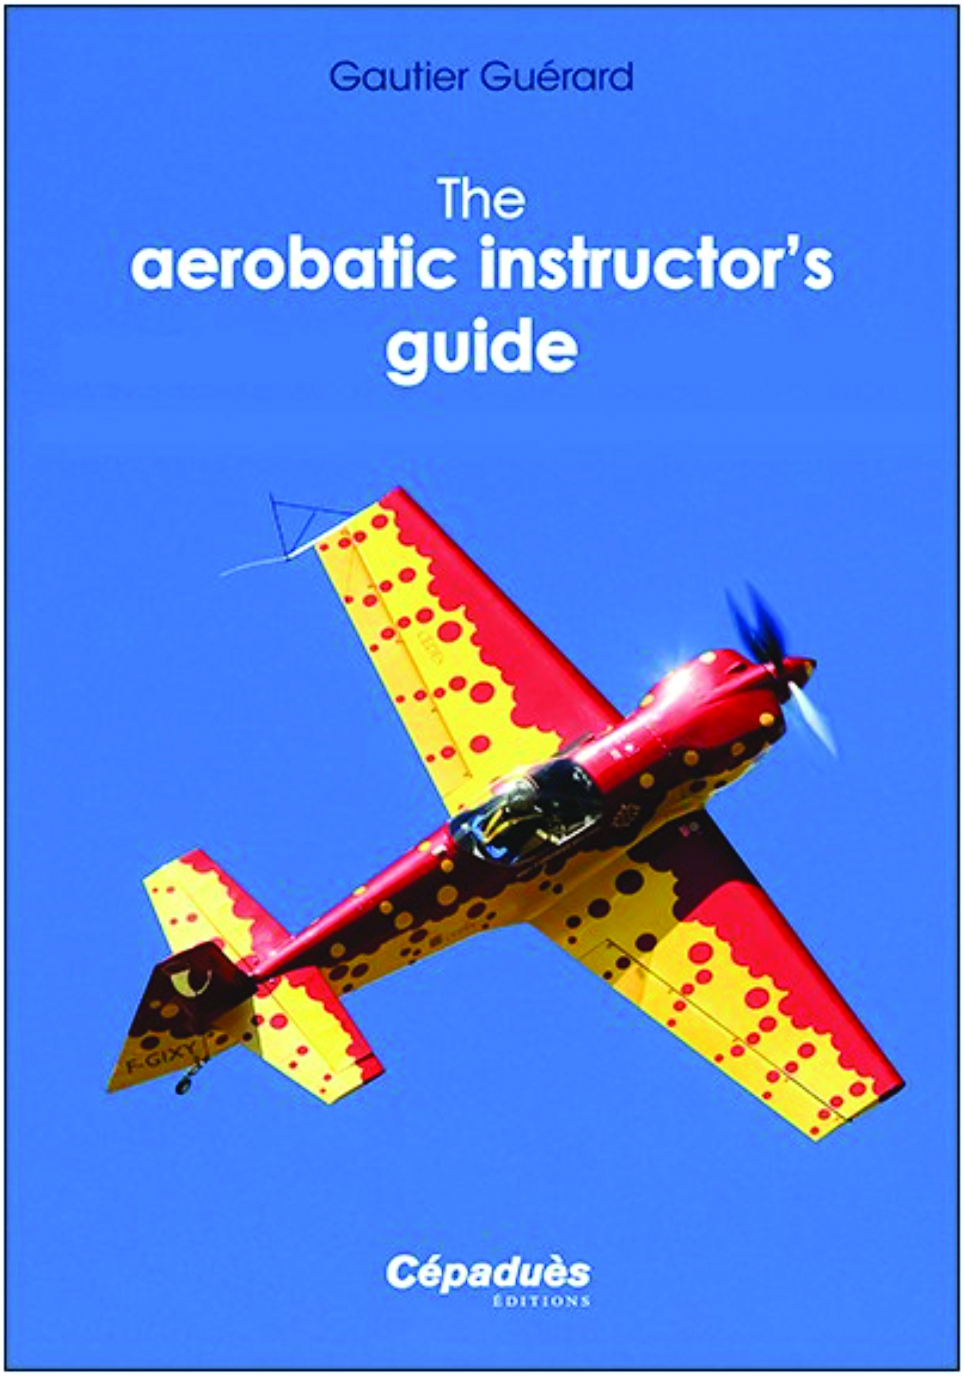 The Aerobatic Instructor's Guide by Gautier Guerard - Cepadues